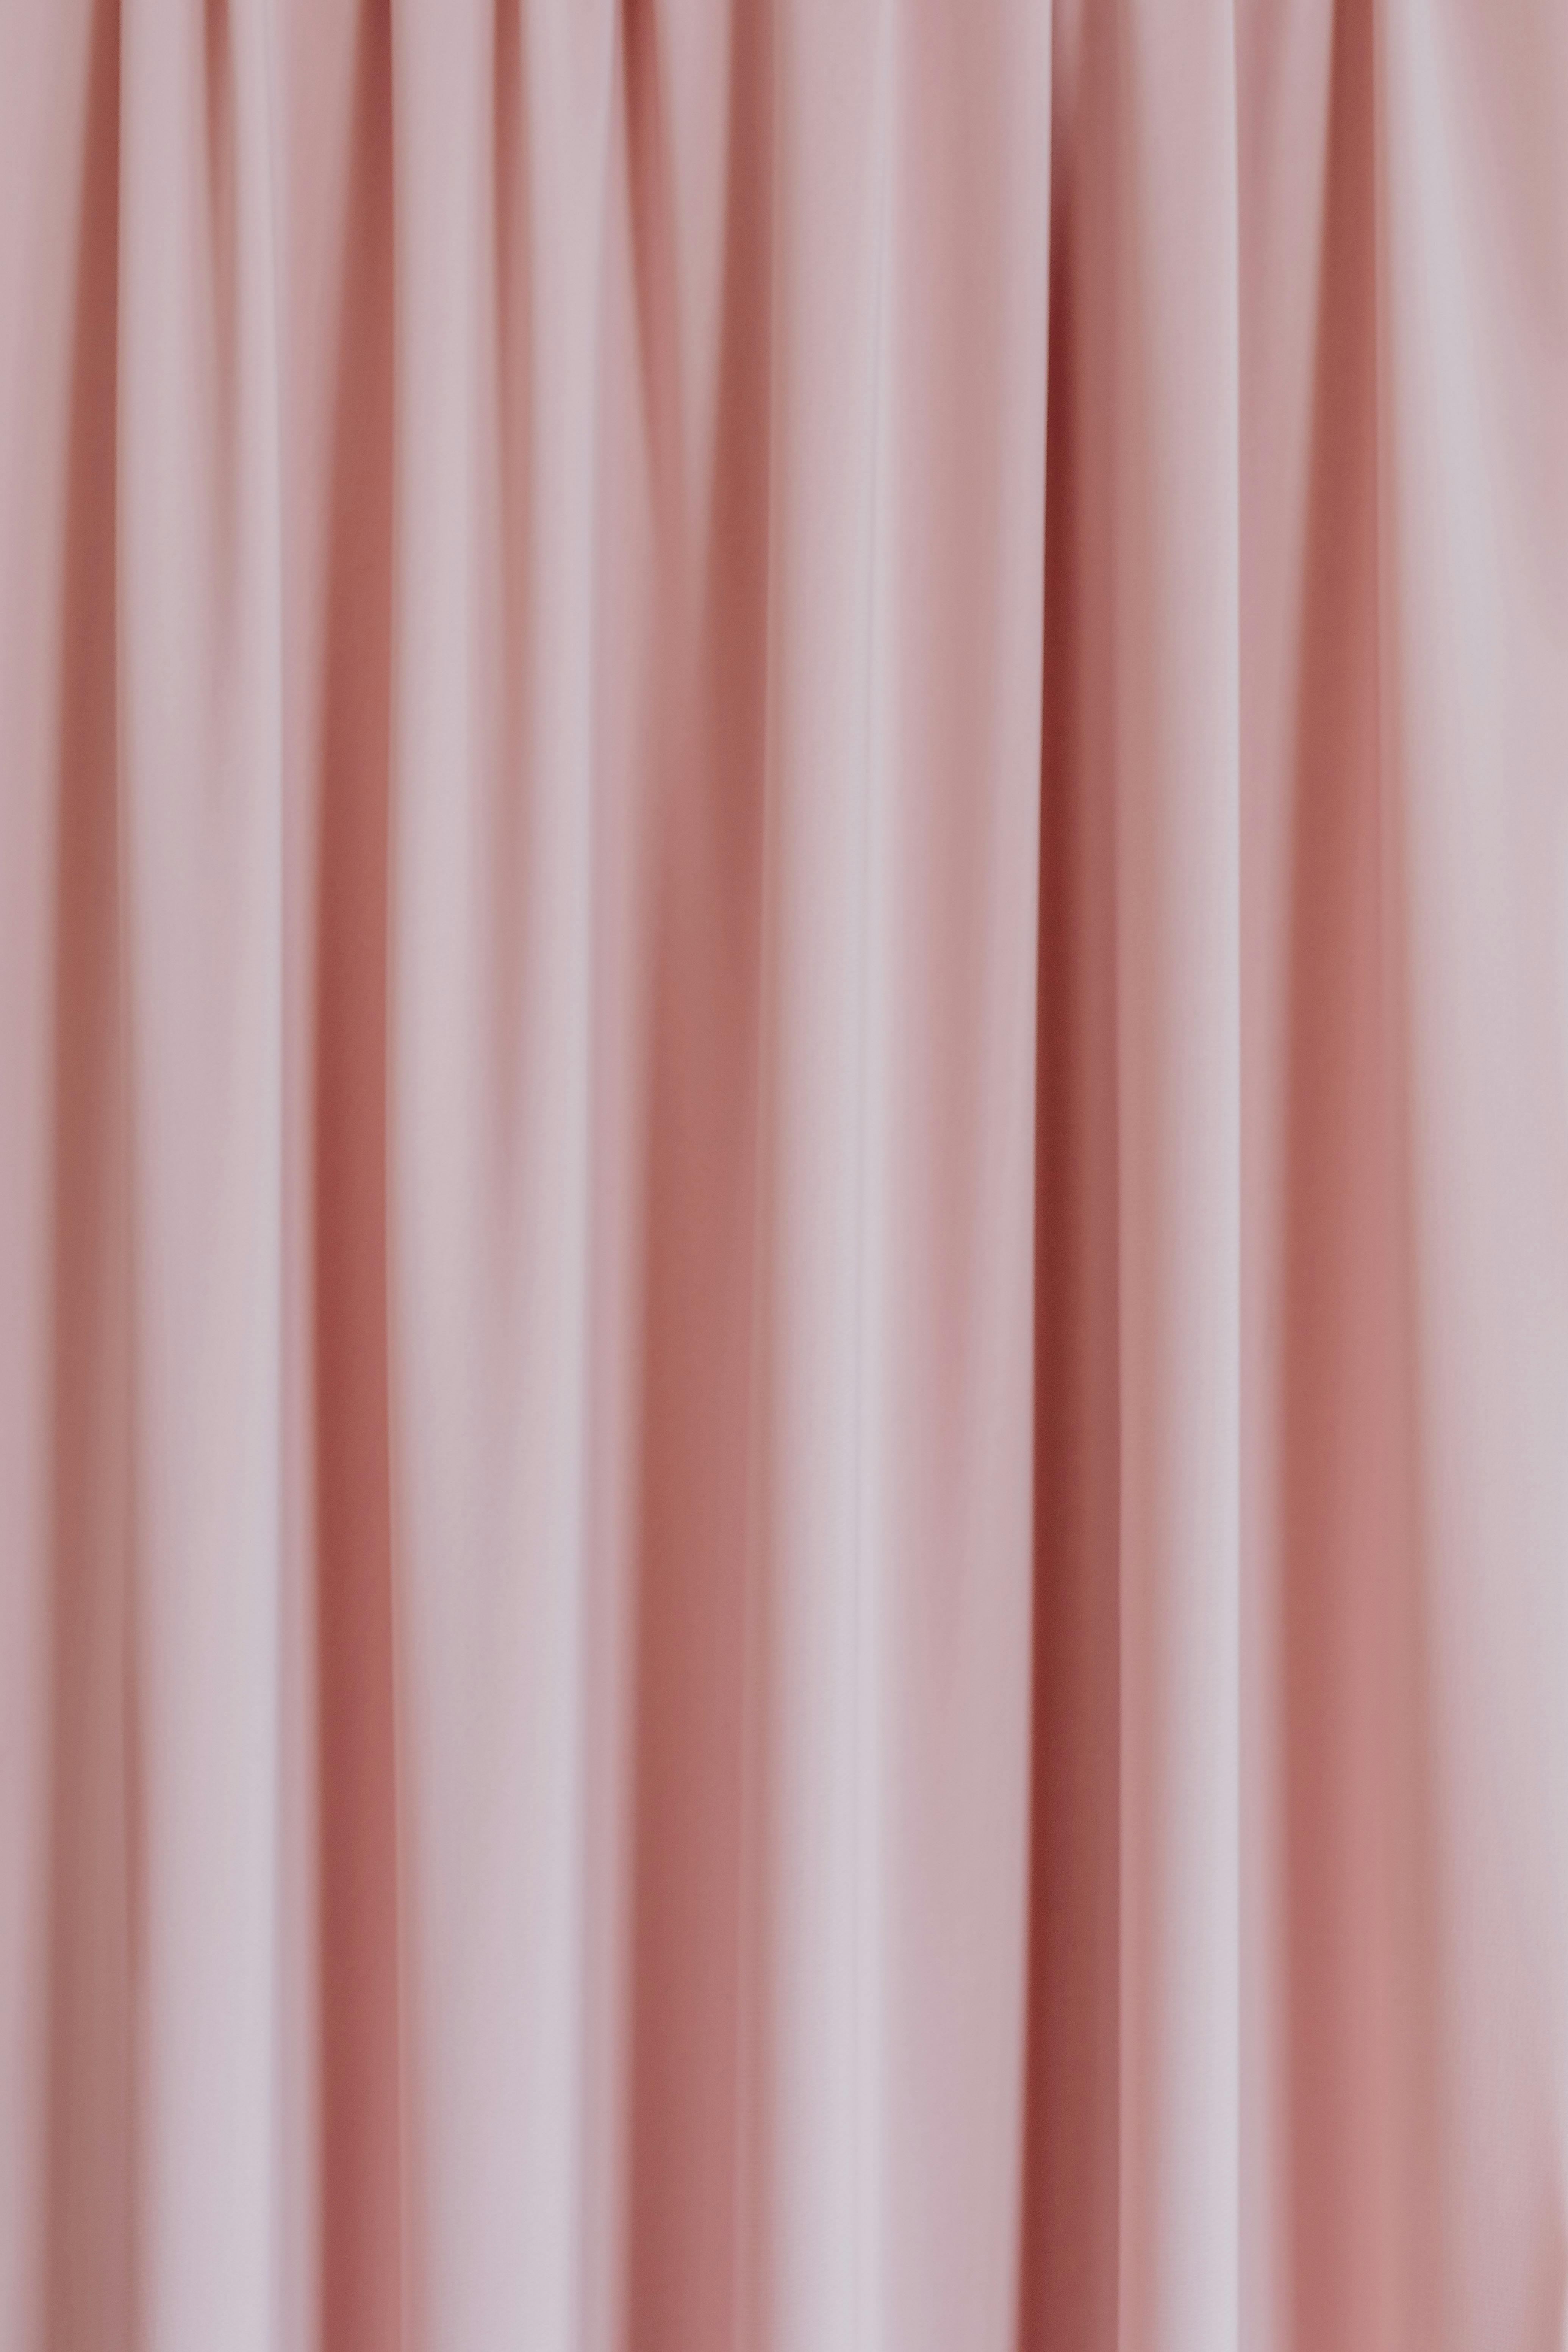 Photo of a Pink Curtain · Free Stock Photo